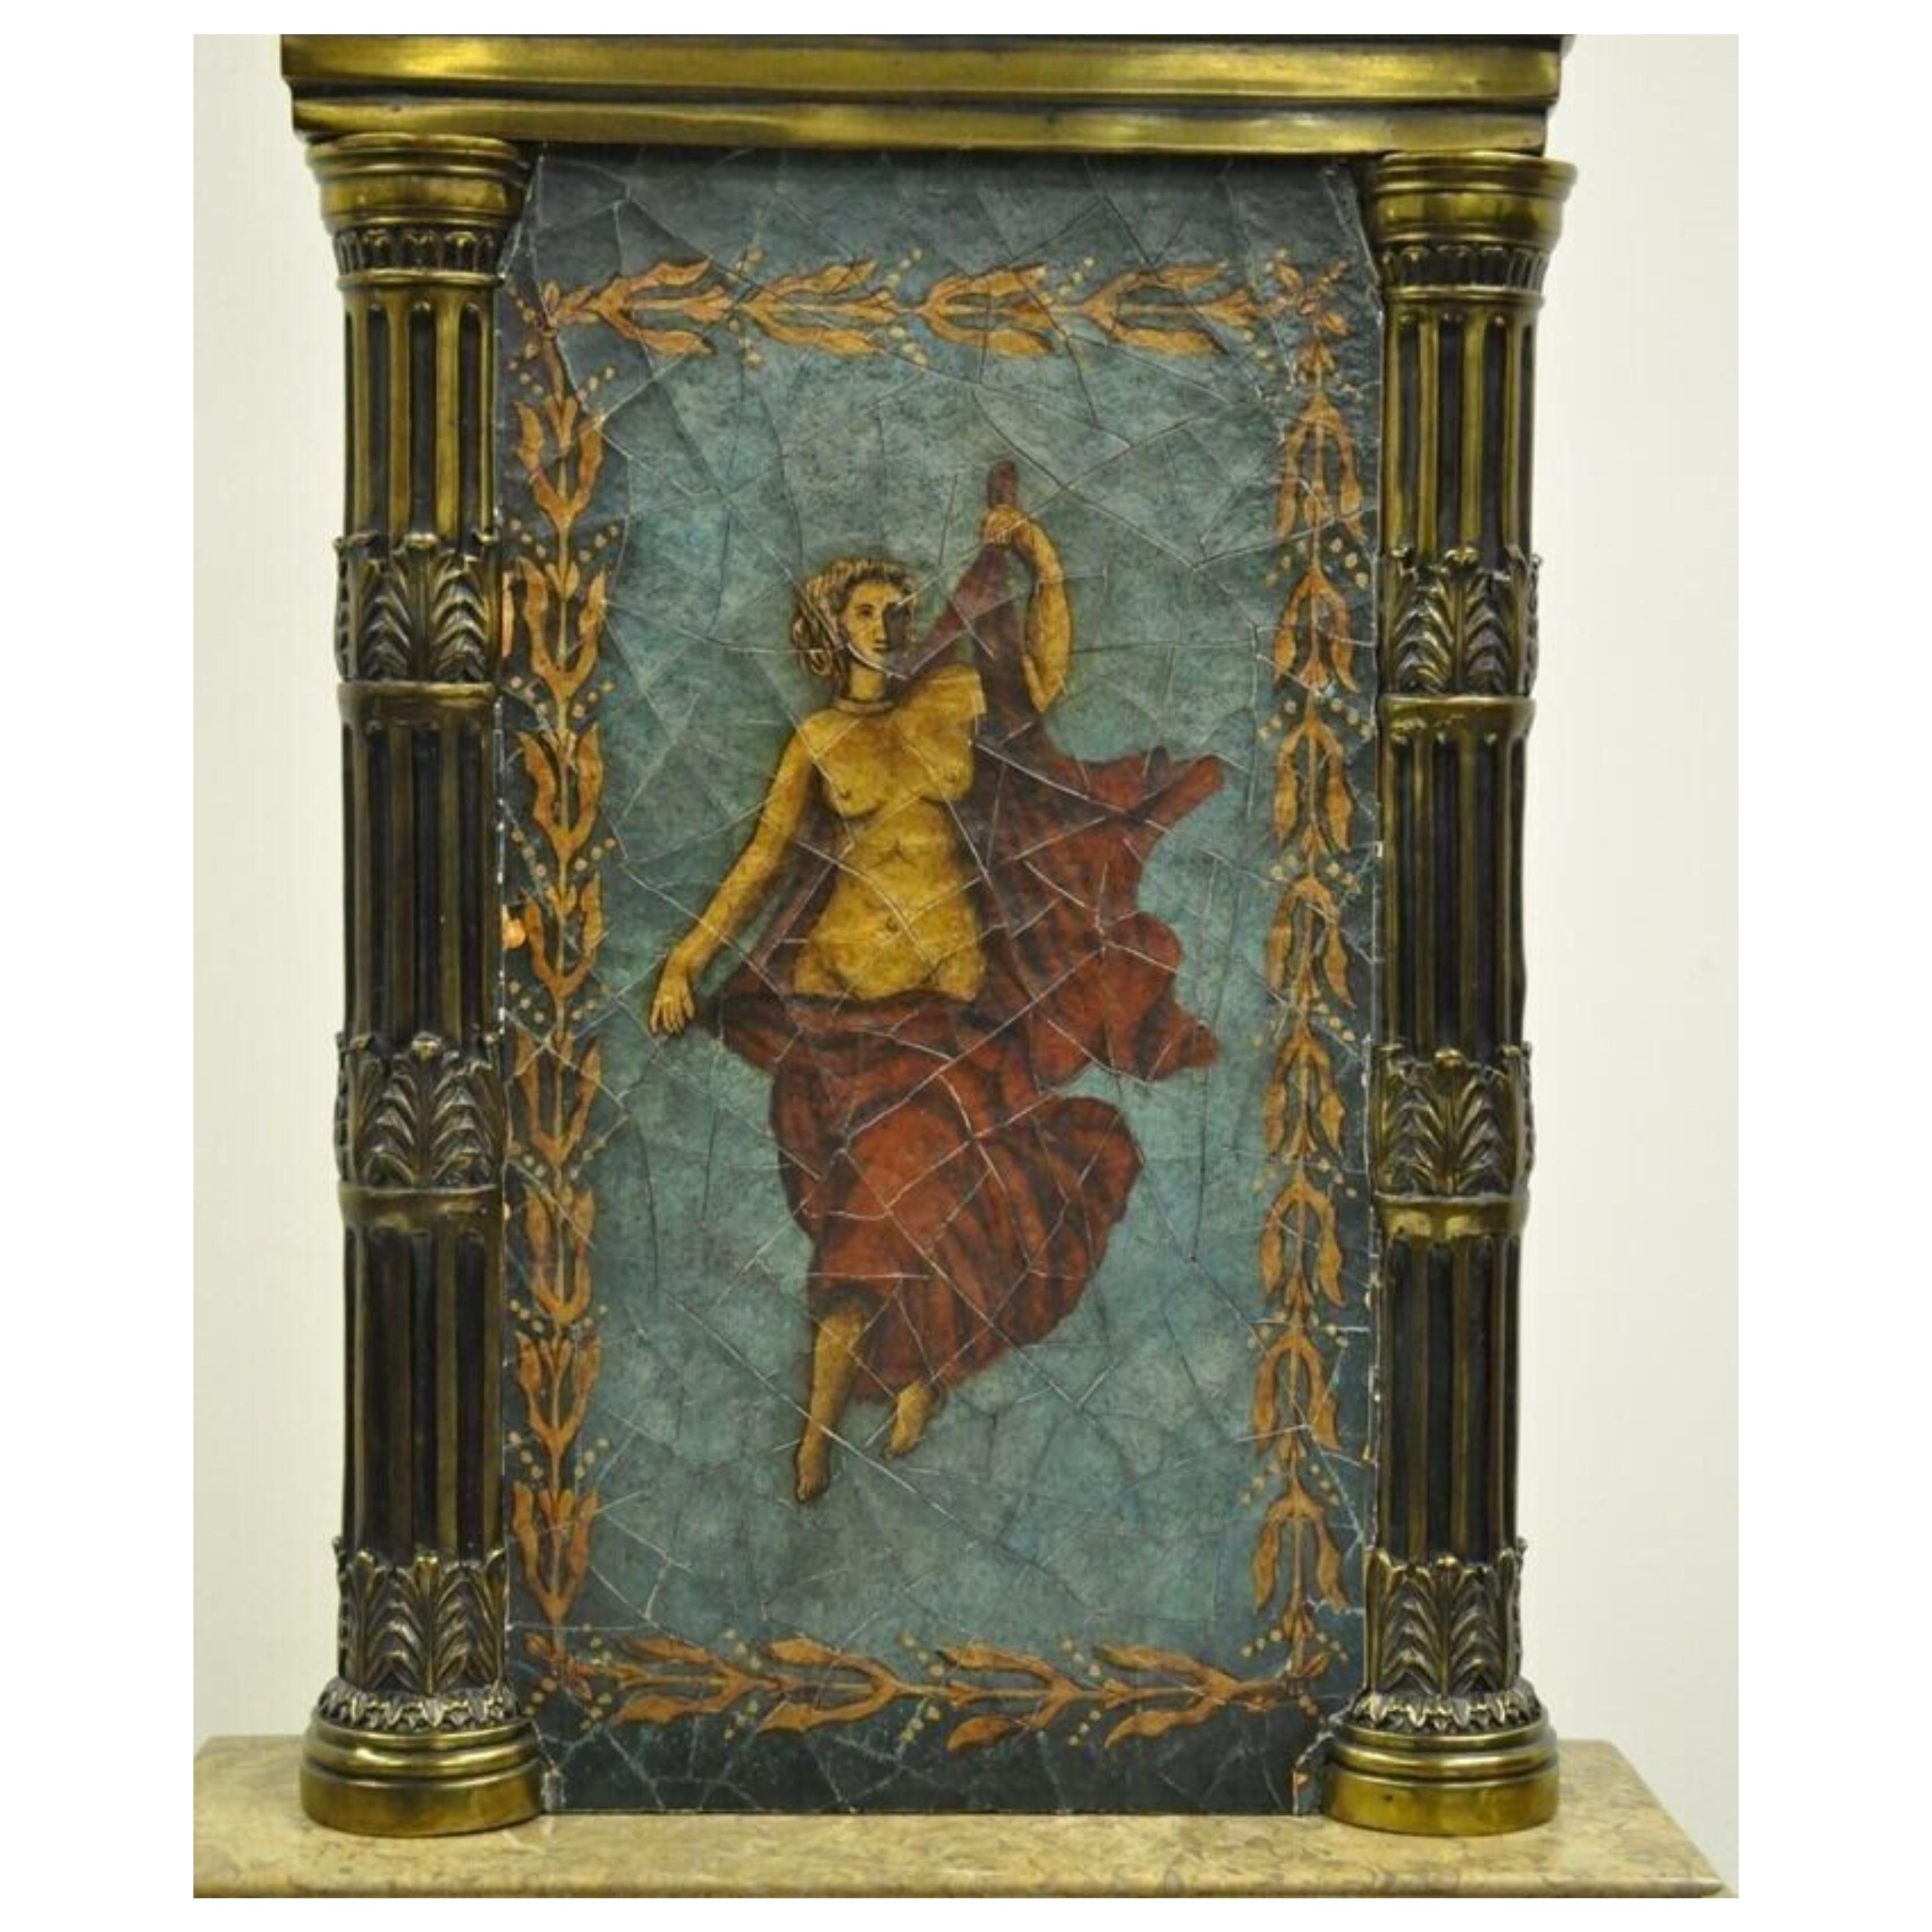 Vintage Neoclassical Style Figural Painted Nude Woman Bronze Marble Table Lamp. Item features a beautiful painted female figure and details, distressed finish, marble step-form base, bronze finish capitol and column-form sides, very nice vintage